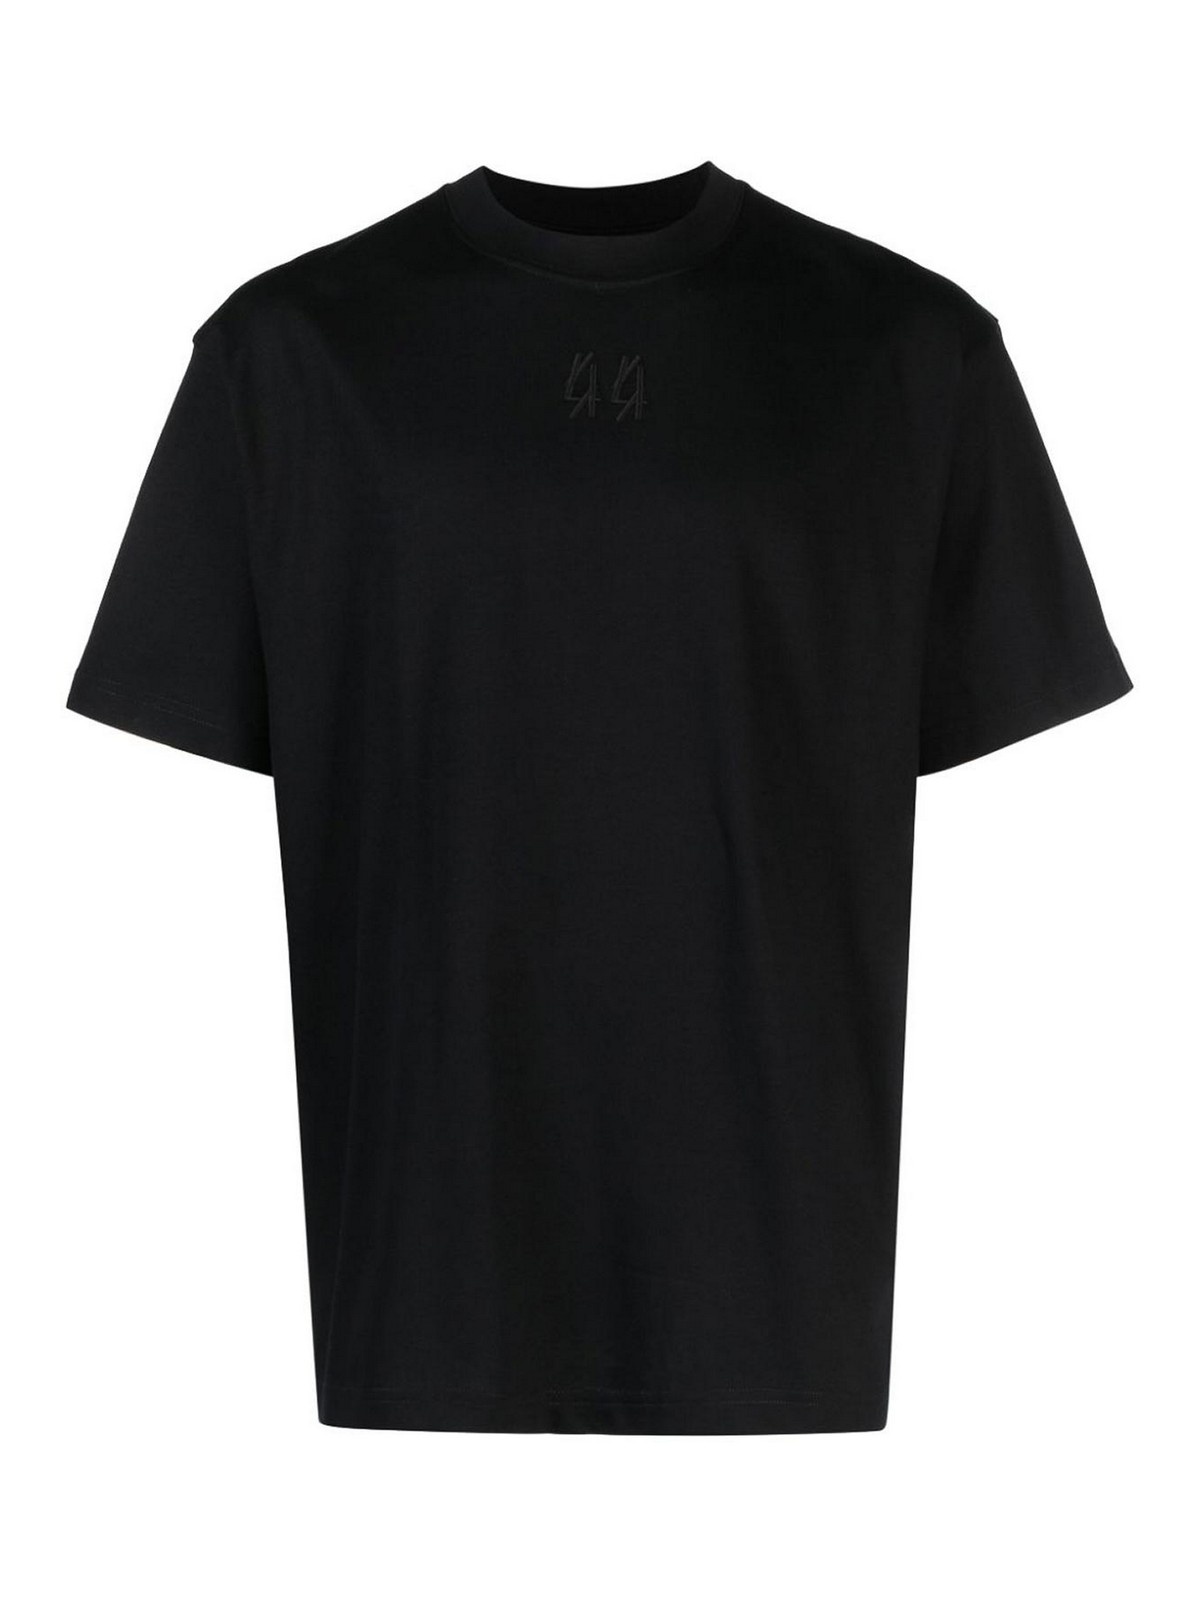 44 Label Group T-shirt In Black